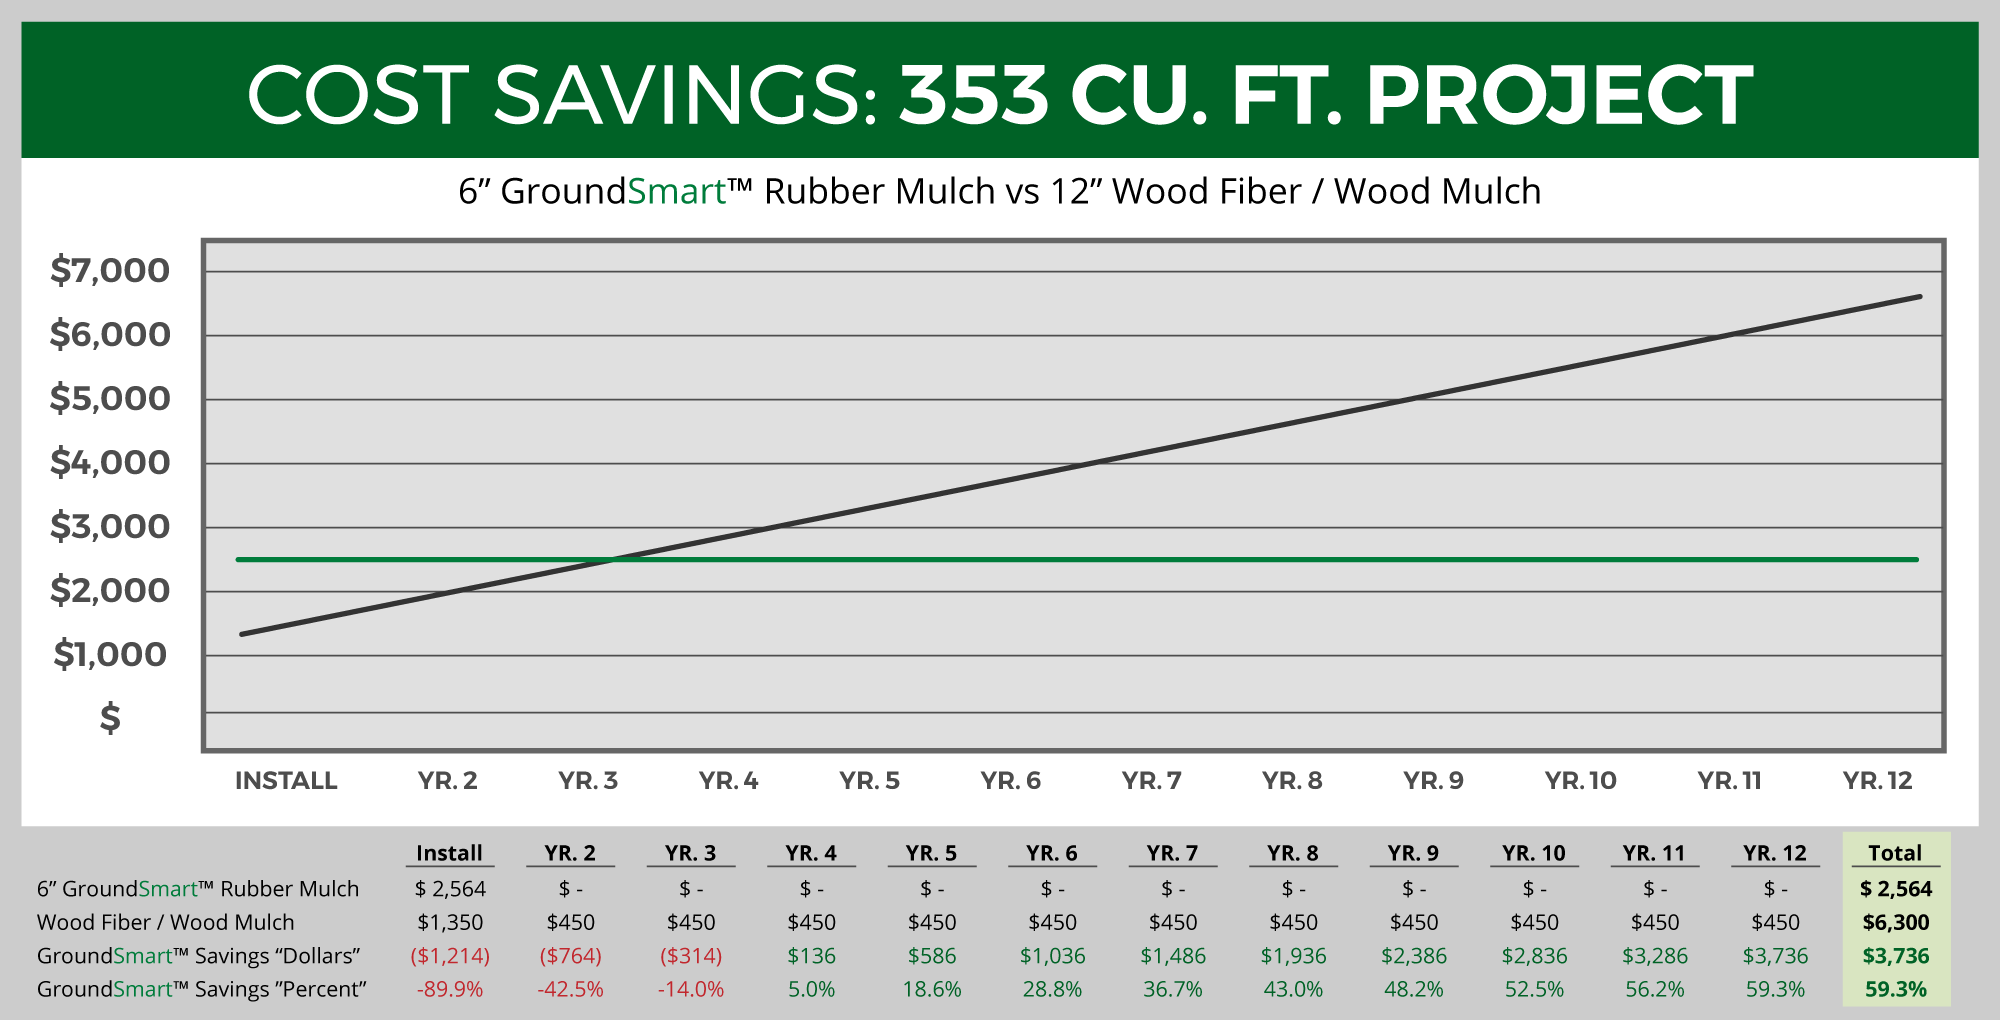 GroundSmart™ Playground Rubber Mulch saves you 59% compared to Wood Fiber/Wood Mulch